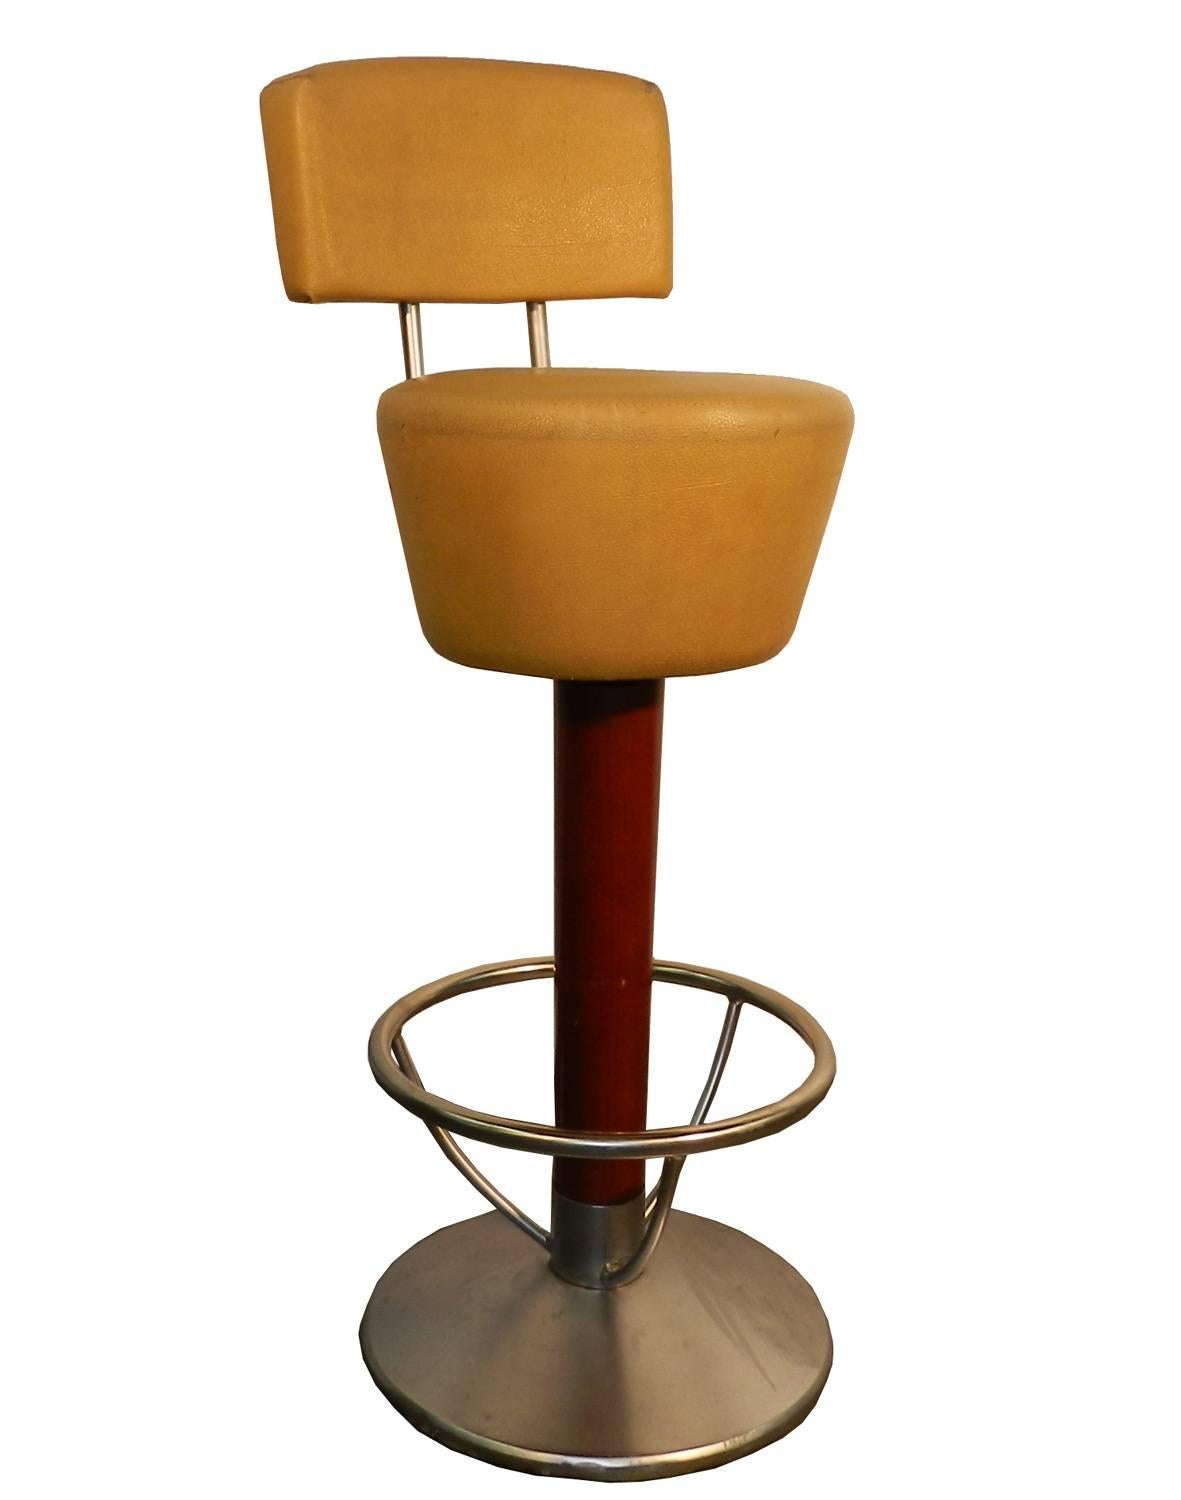 Suite of four bar stools, stained beech, steel and faux leather, circa 1970.
Need a new upholstery.